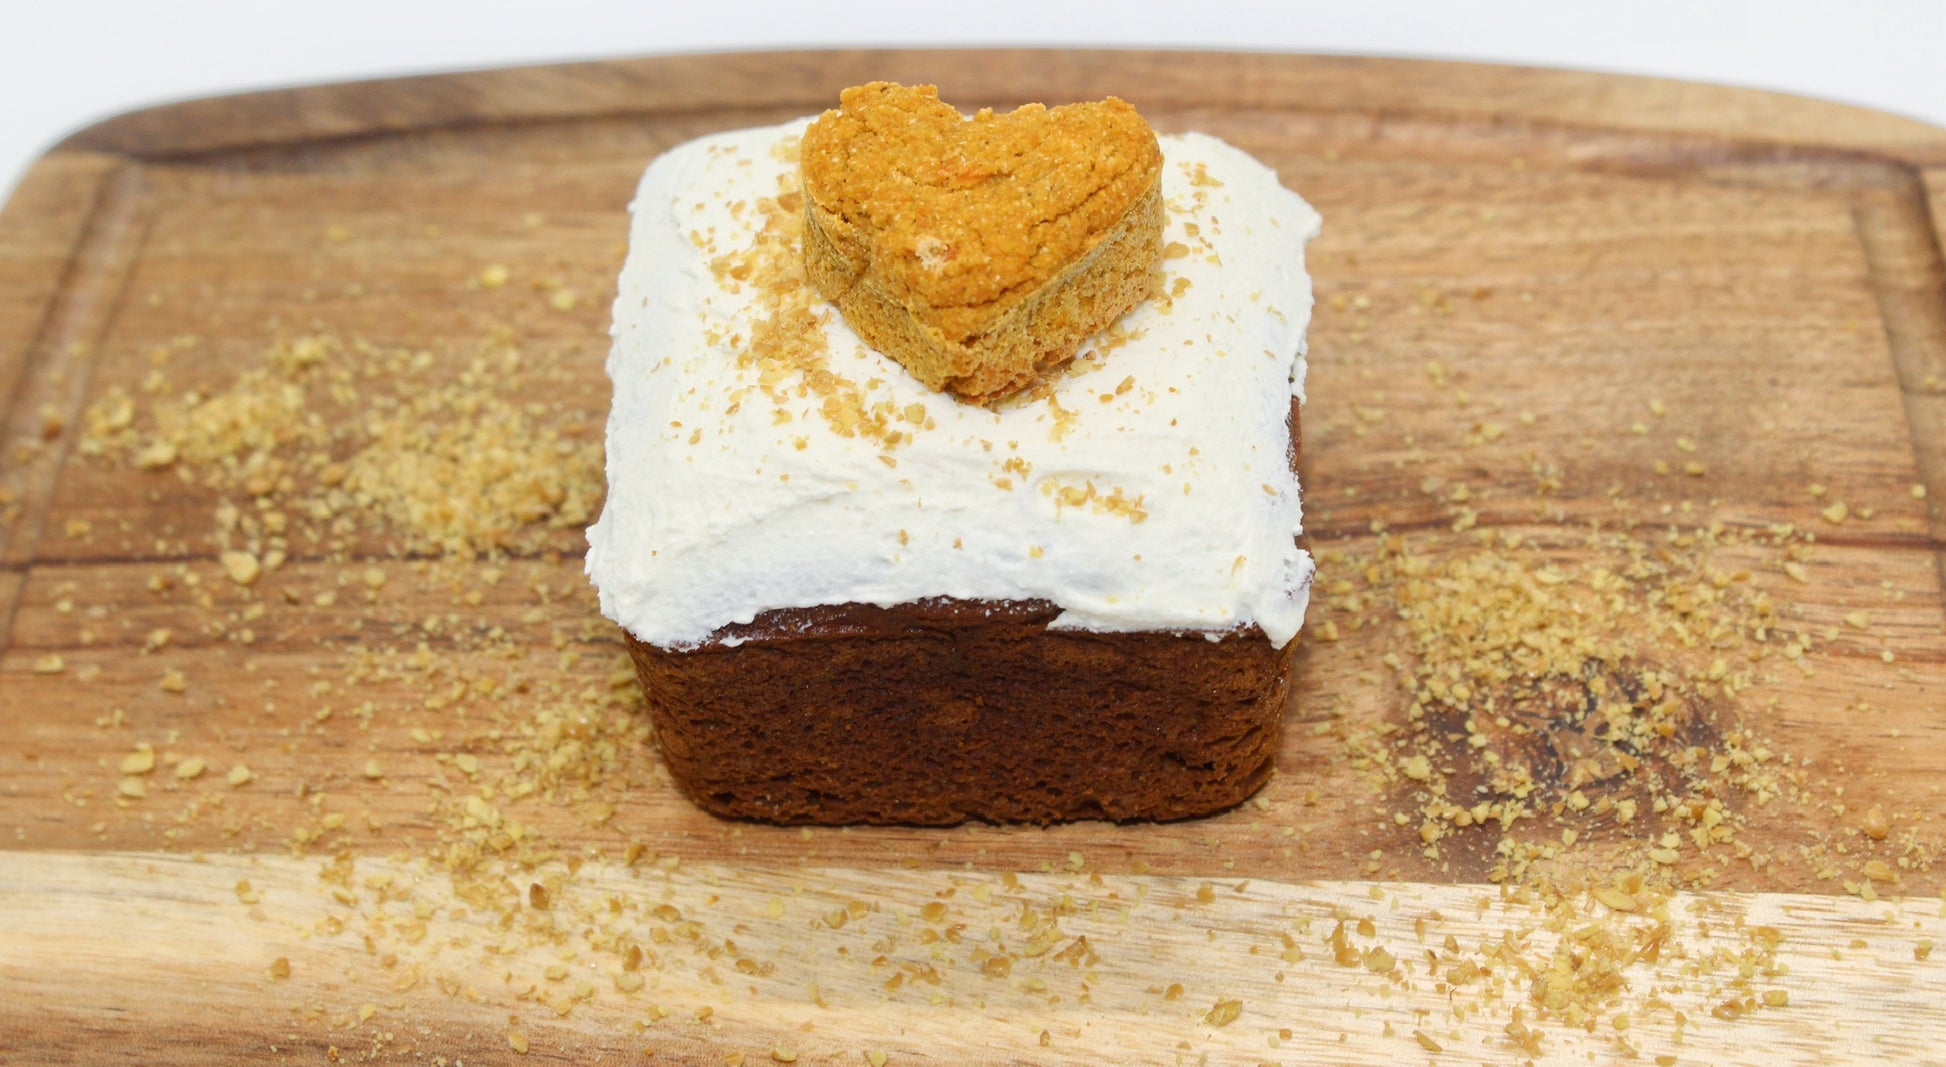 A beautiful sweet potato and carrot flavored mini dog cake with white frosting and flaxseed sprinkled on top. This yummy mini cake also has a heart shaped sweet potato and carrot training treat on top. The mini cake is displayed on a small cutting board with flaxseed sprinkled all around.